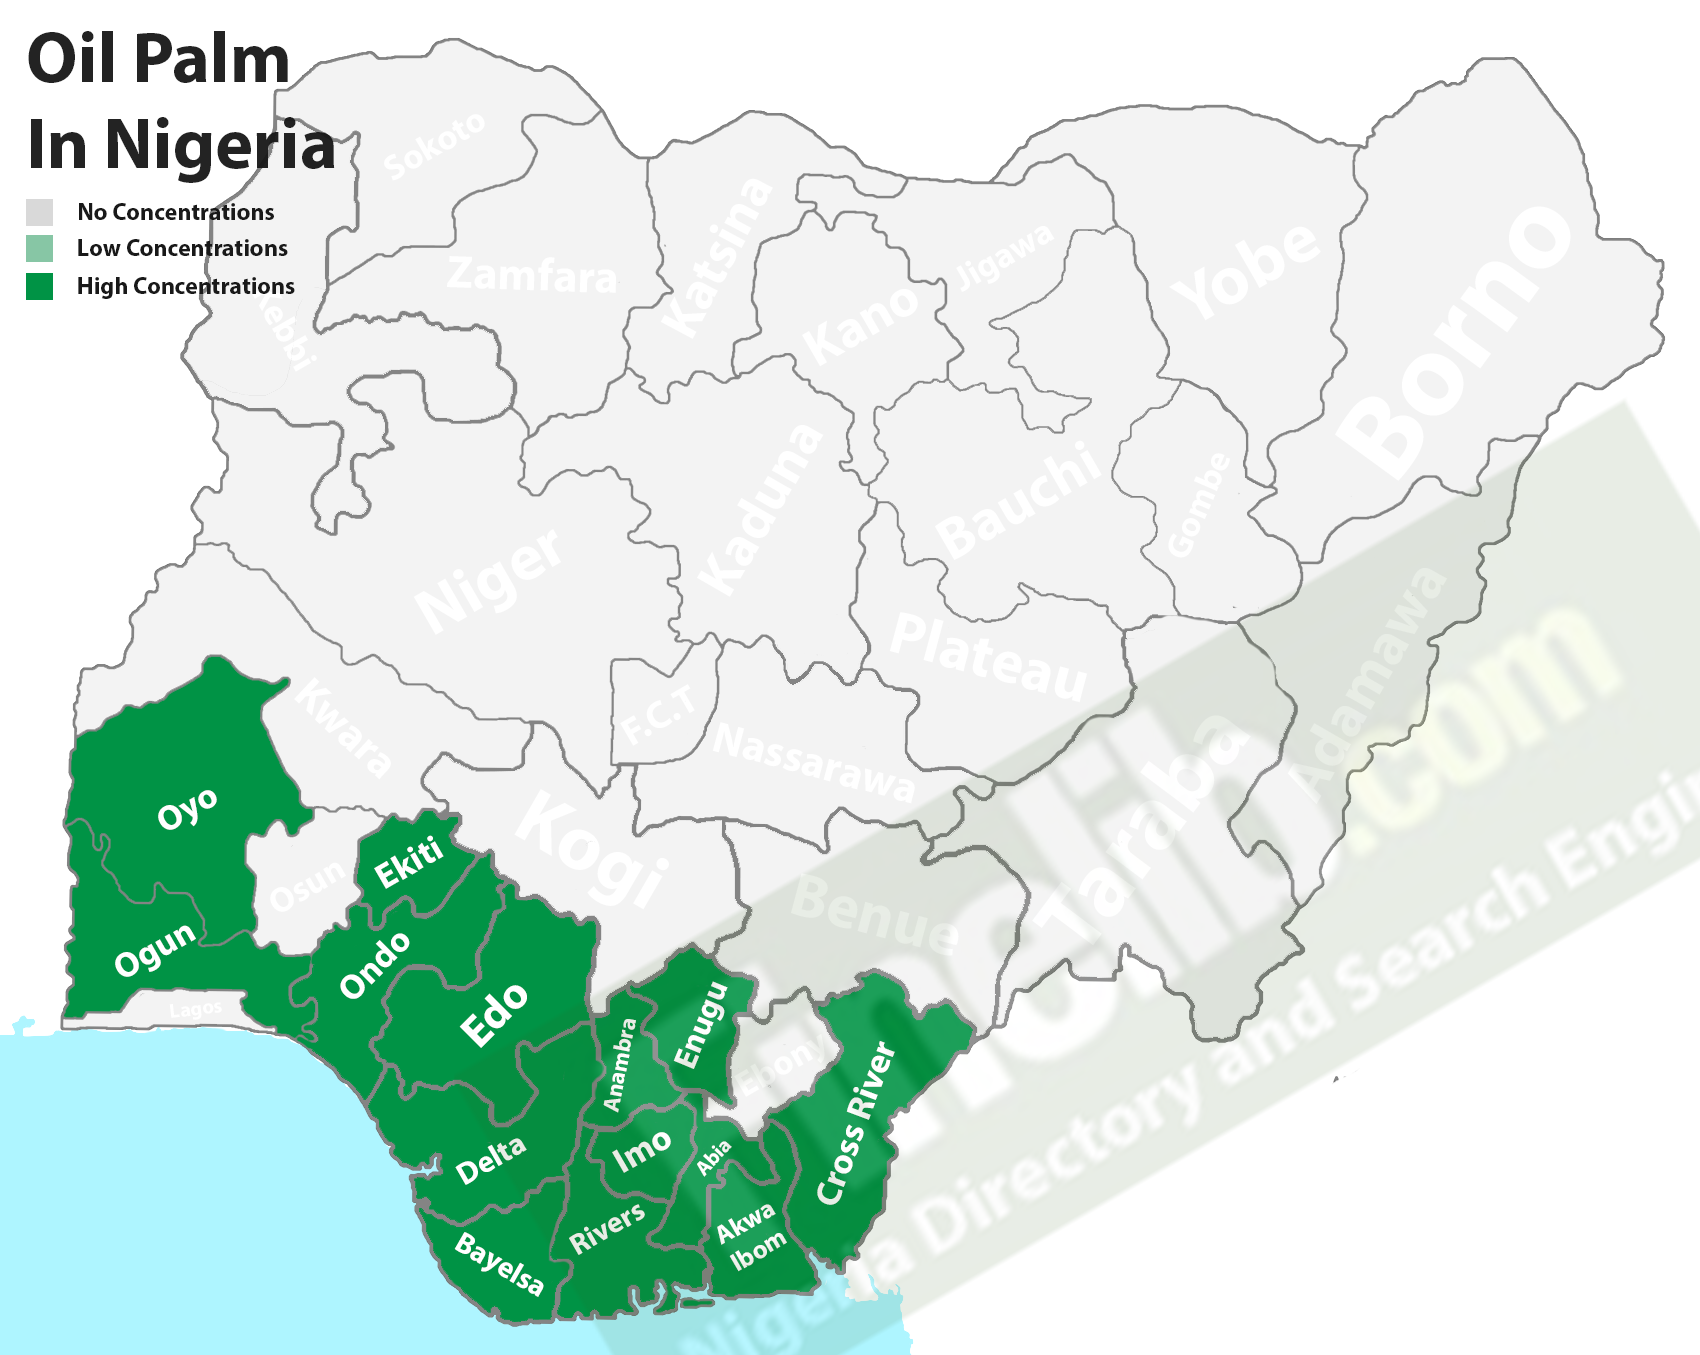 Oil Palm producing states in Nigeria